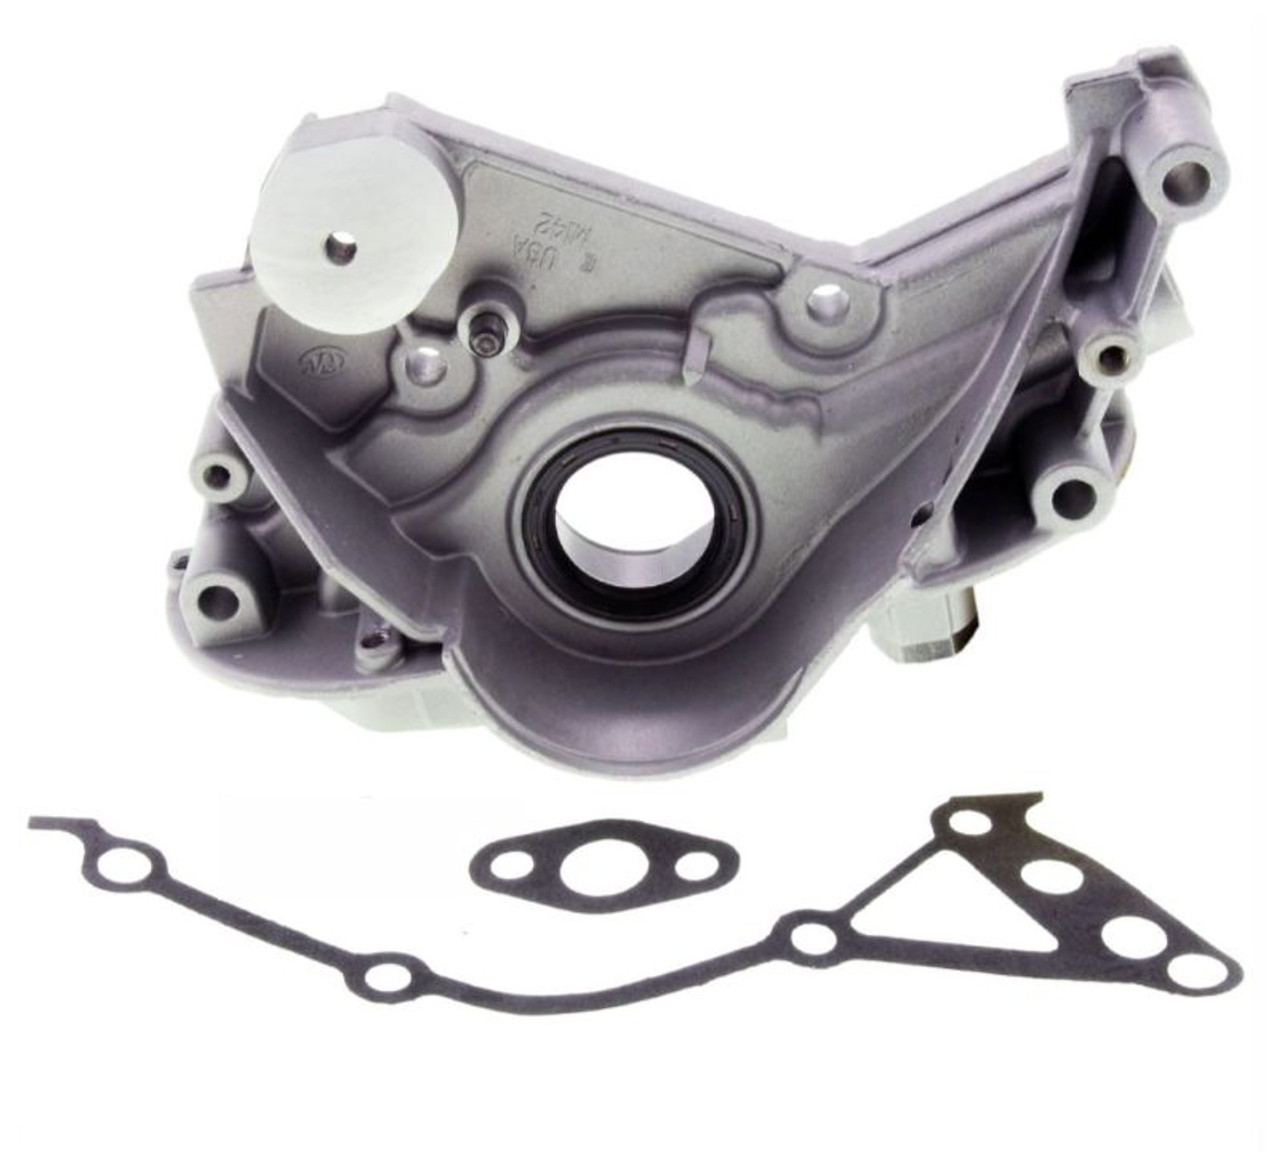 Oil Pump - 1993 Plymouth Voyager 3.0L (EP142.F58)